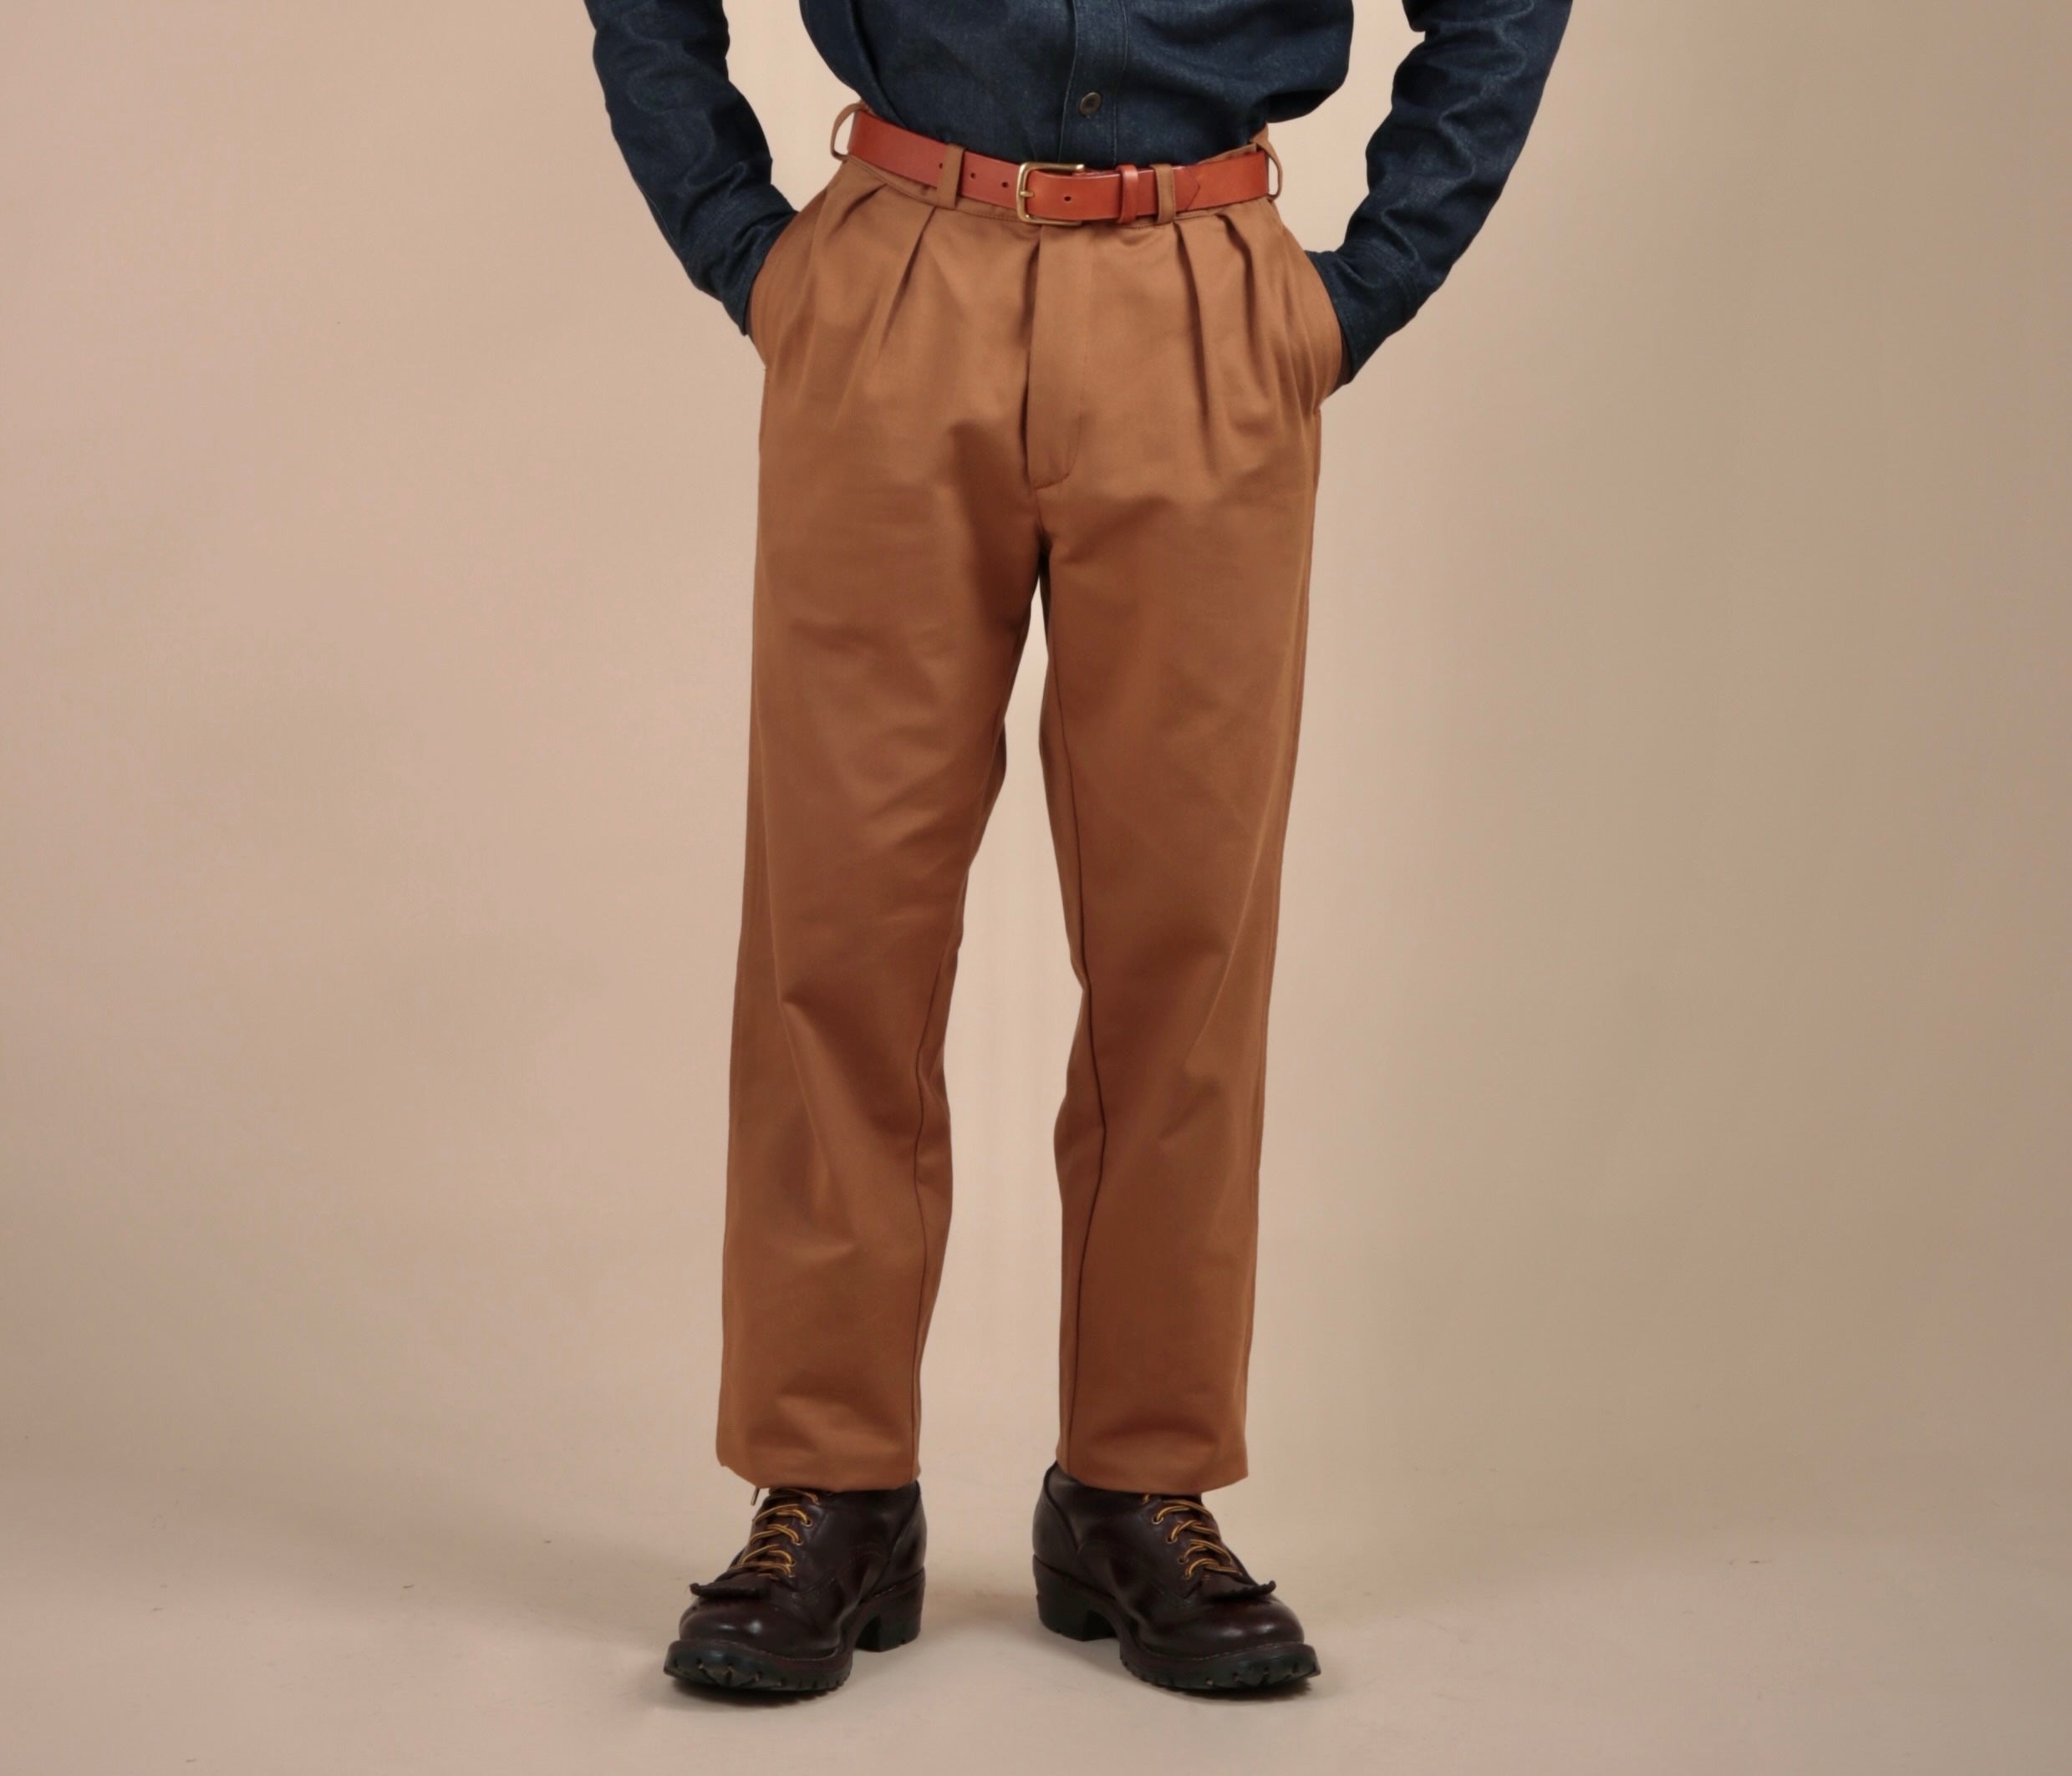 Man wears Carrier Company Chestnut leather Belt with Classic Trouser and Denim Collar Shirt